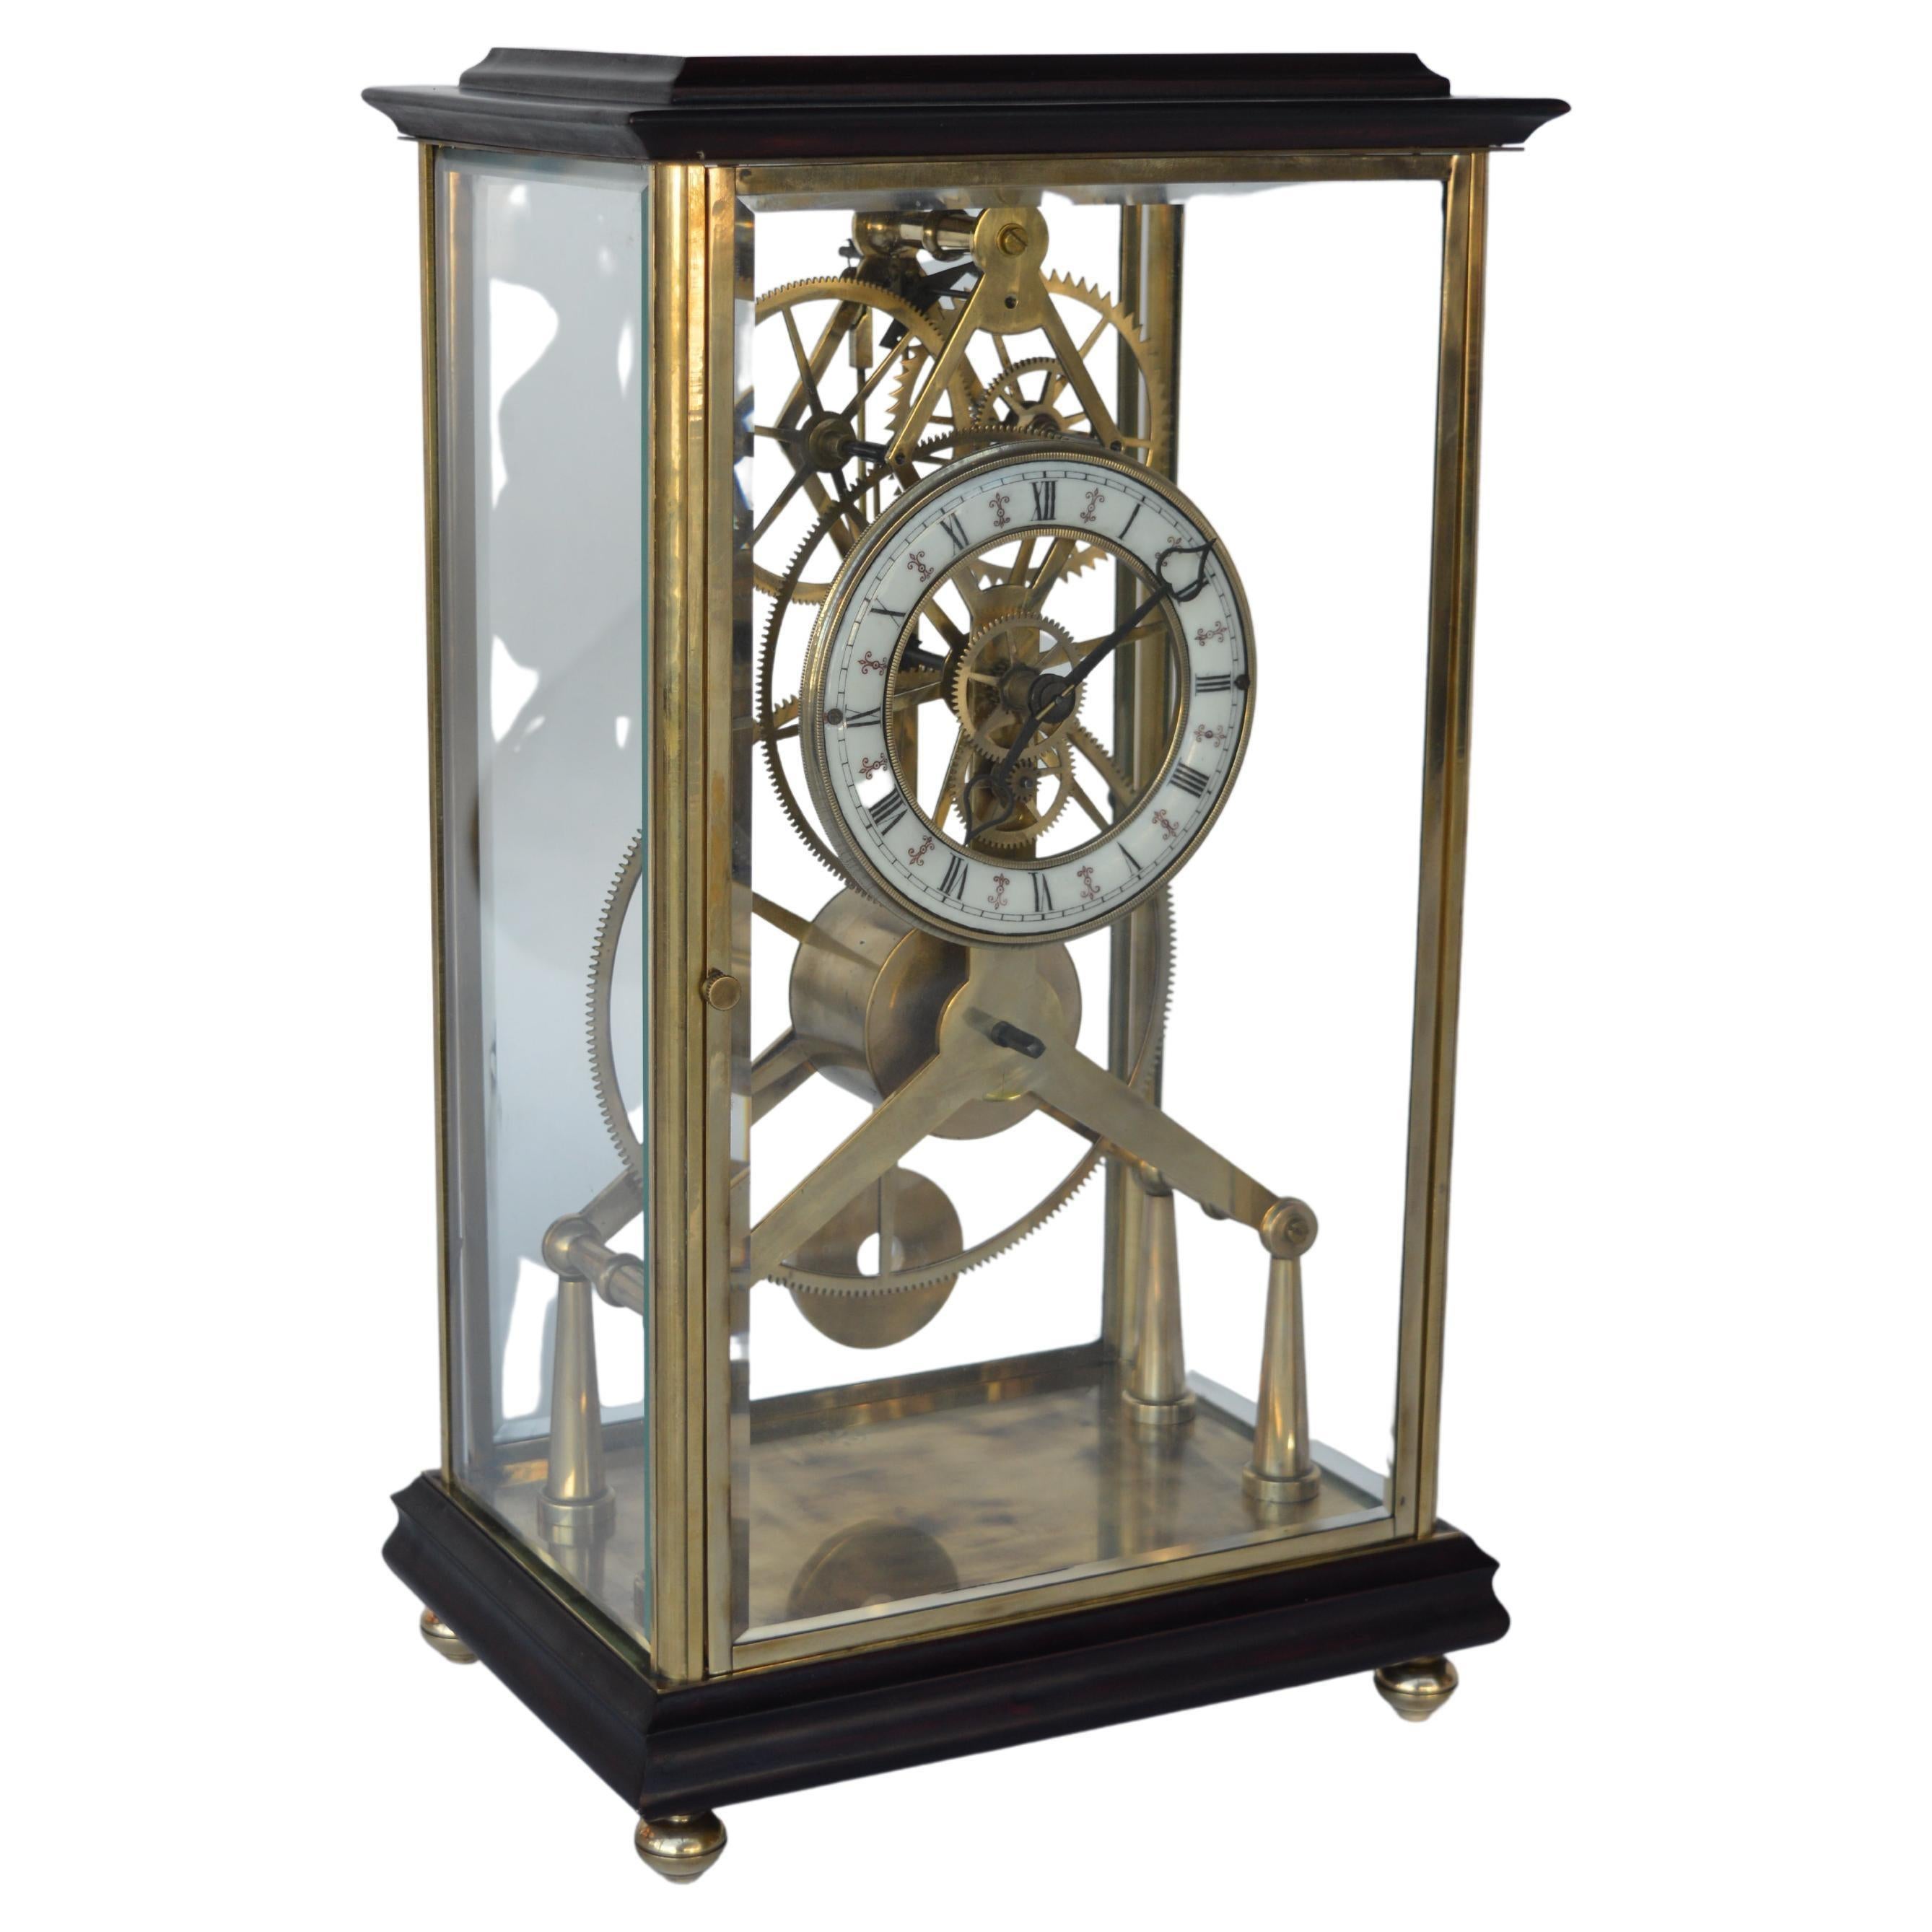 Stamped, French late 19th century skeleton clock. Made out of Mahogany wood and brass. Porcelain dial with roman numeral details.